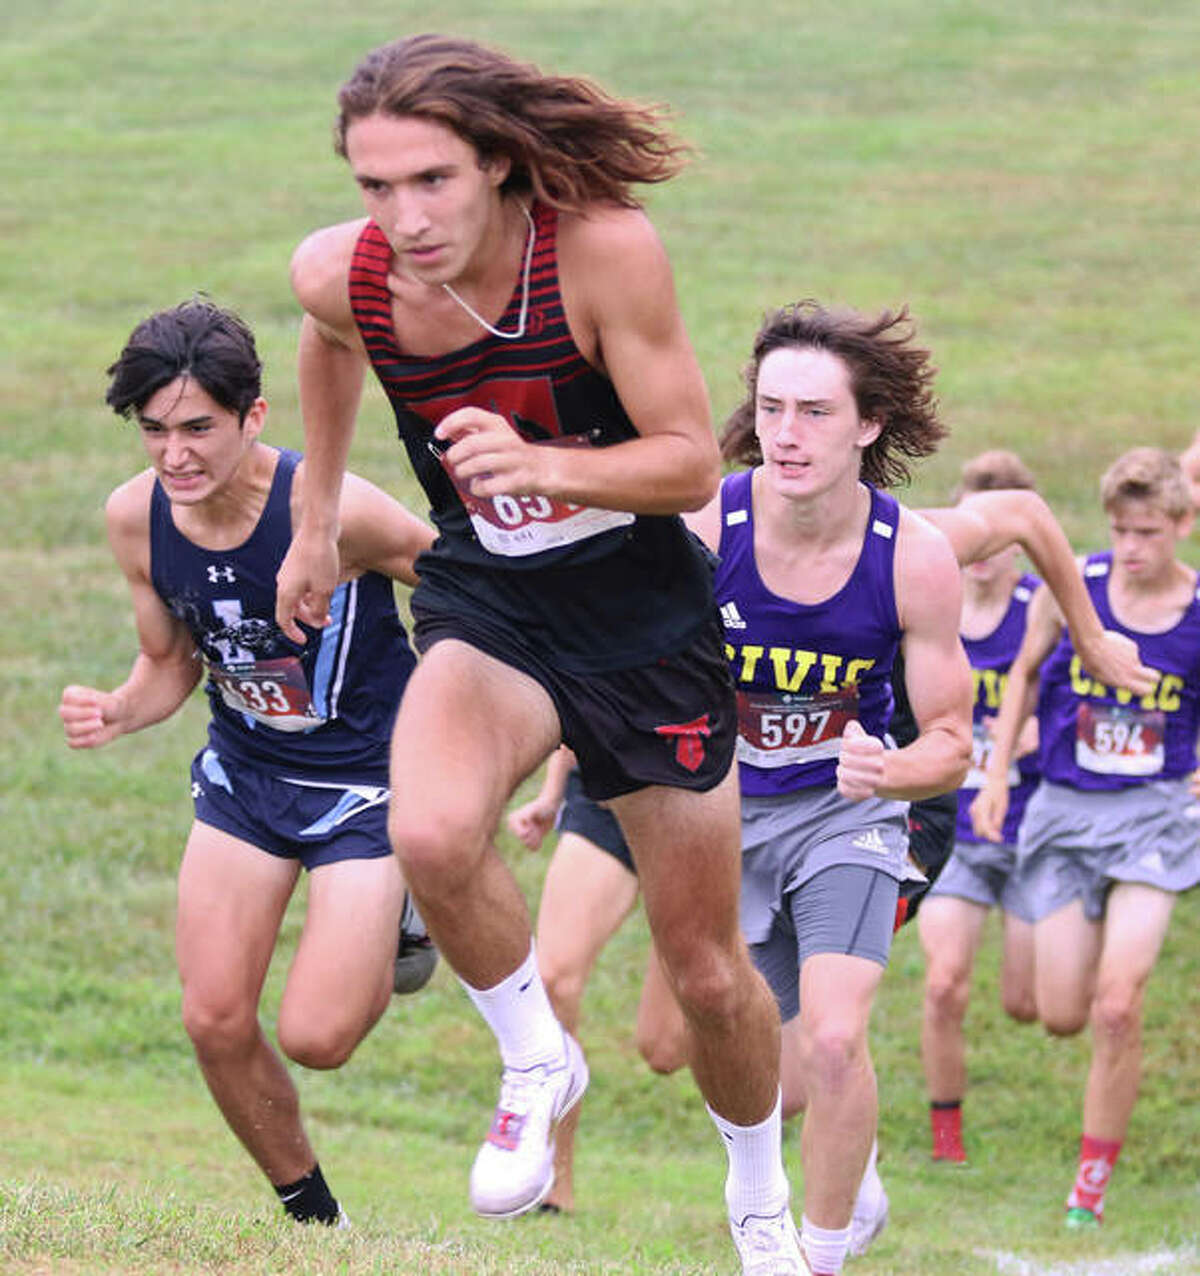 Triad’s Blake Bleier is first up the first hill ahead of Jersey’s Cole Martinez (left) and CM’s Aslan Henderson (597) in Saturday’s Pre-MVC Meet in Troy. Bleier finished third in the race, with Martinez sixth and Henderson 13th.